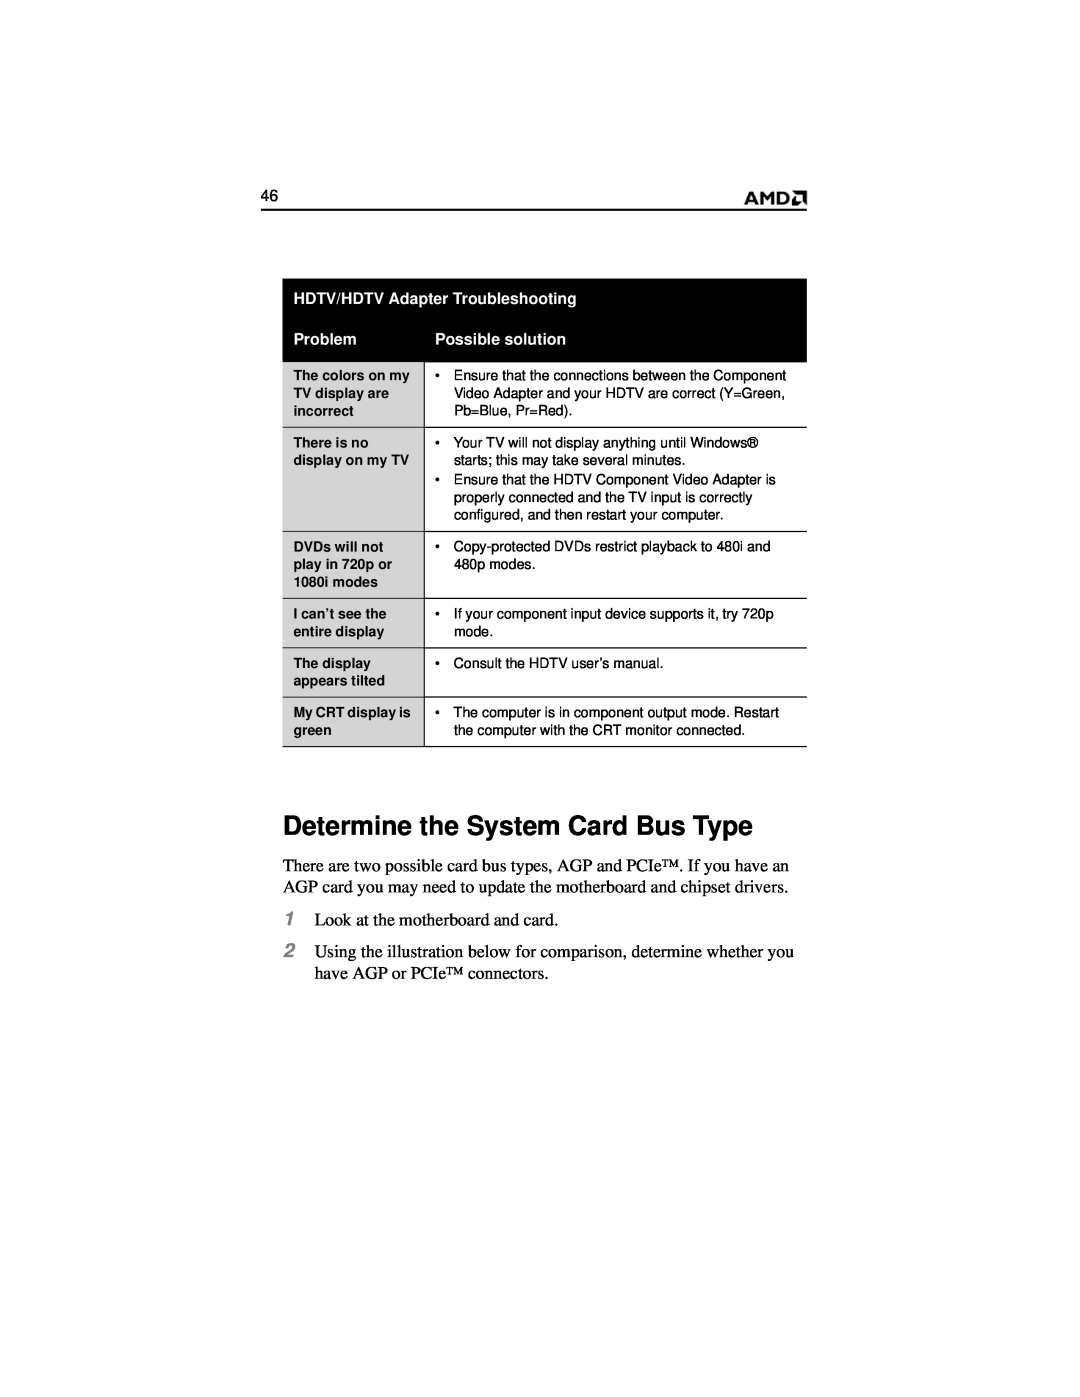 AMD HD 2400 manual Determine the System Card Bus Type 